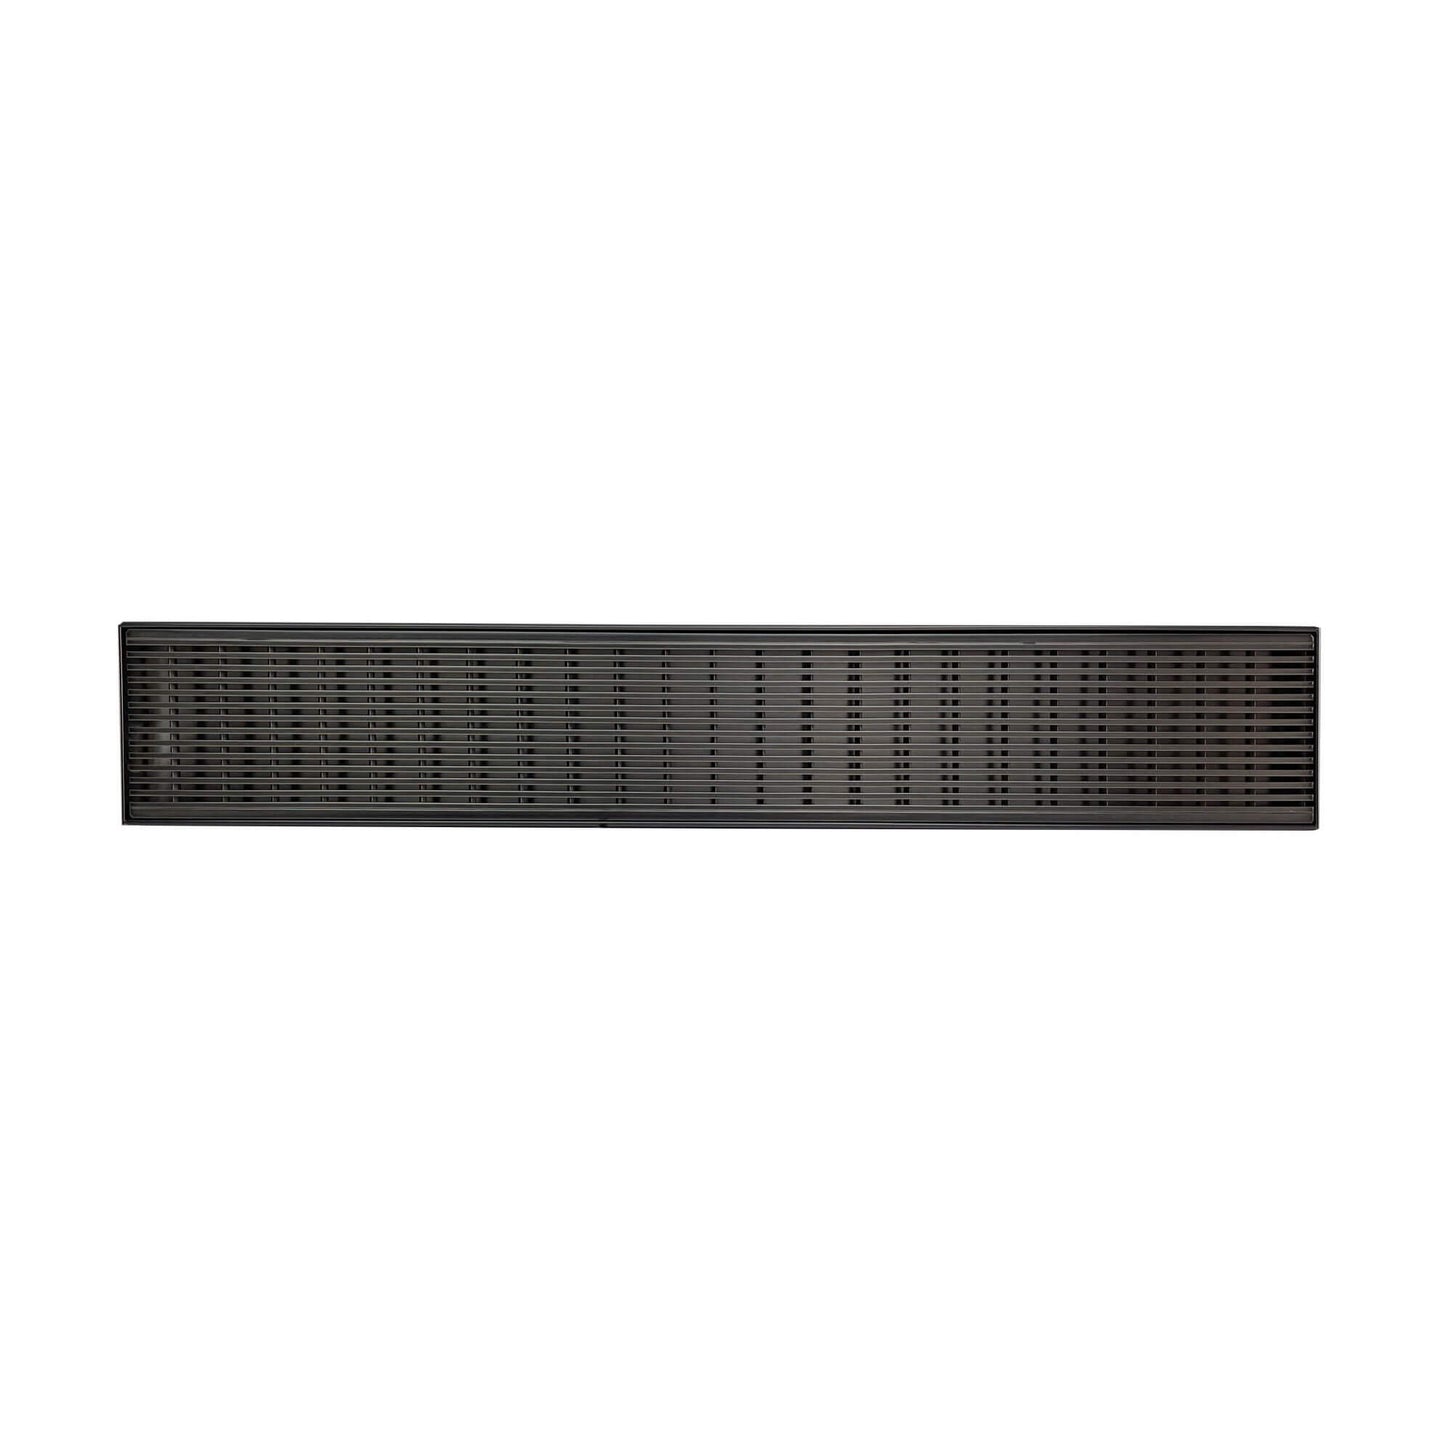 Wedge Wire Grate and Channel Drain - Gunmetal Grey